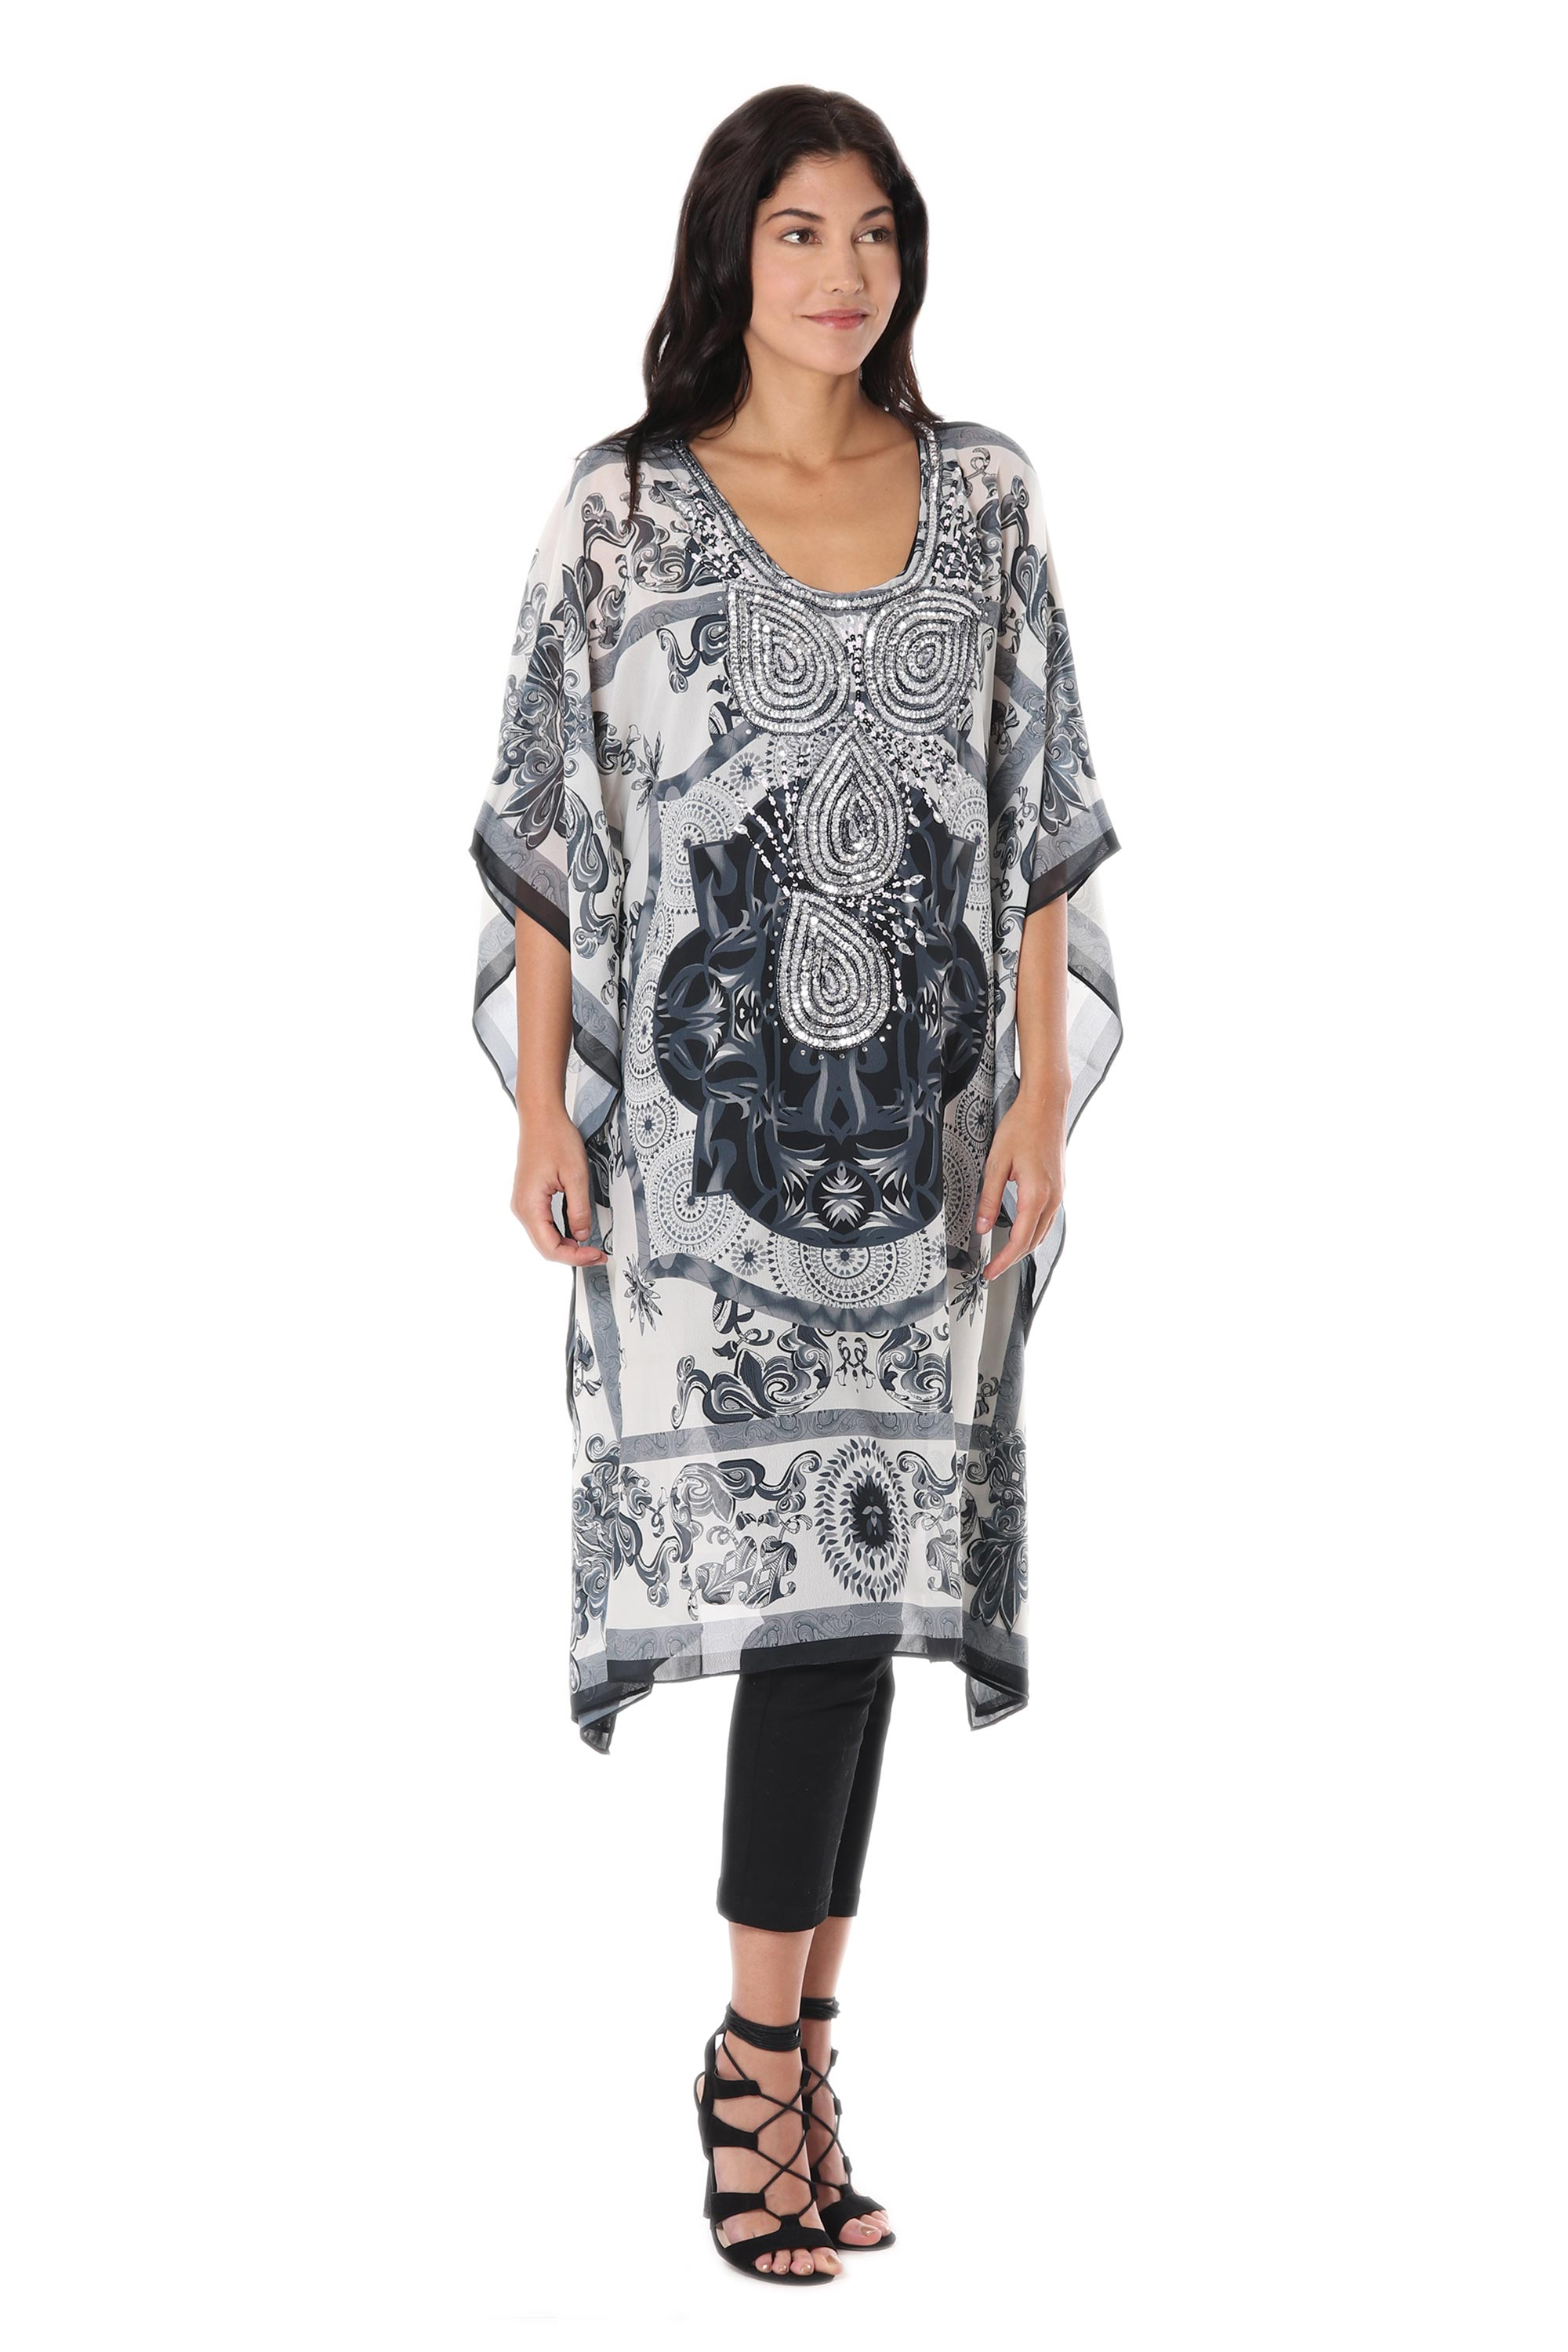 Black and White Sequined Polyester Caftan from India - Urban Chic | NOVICA